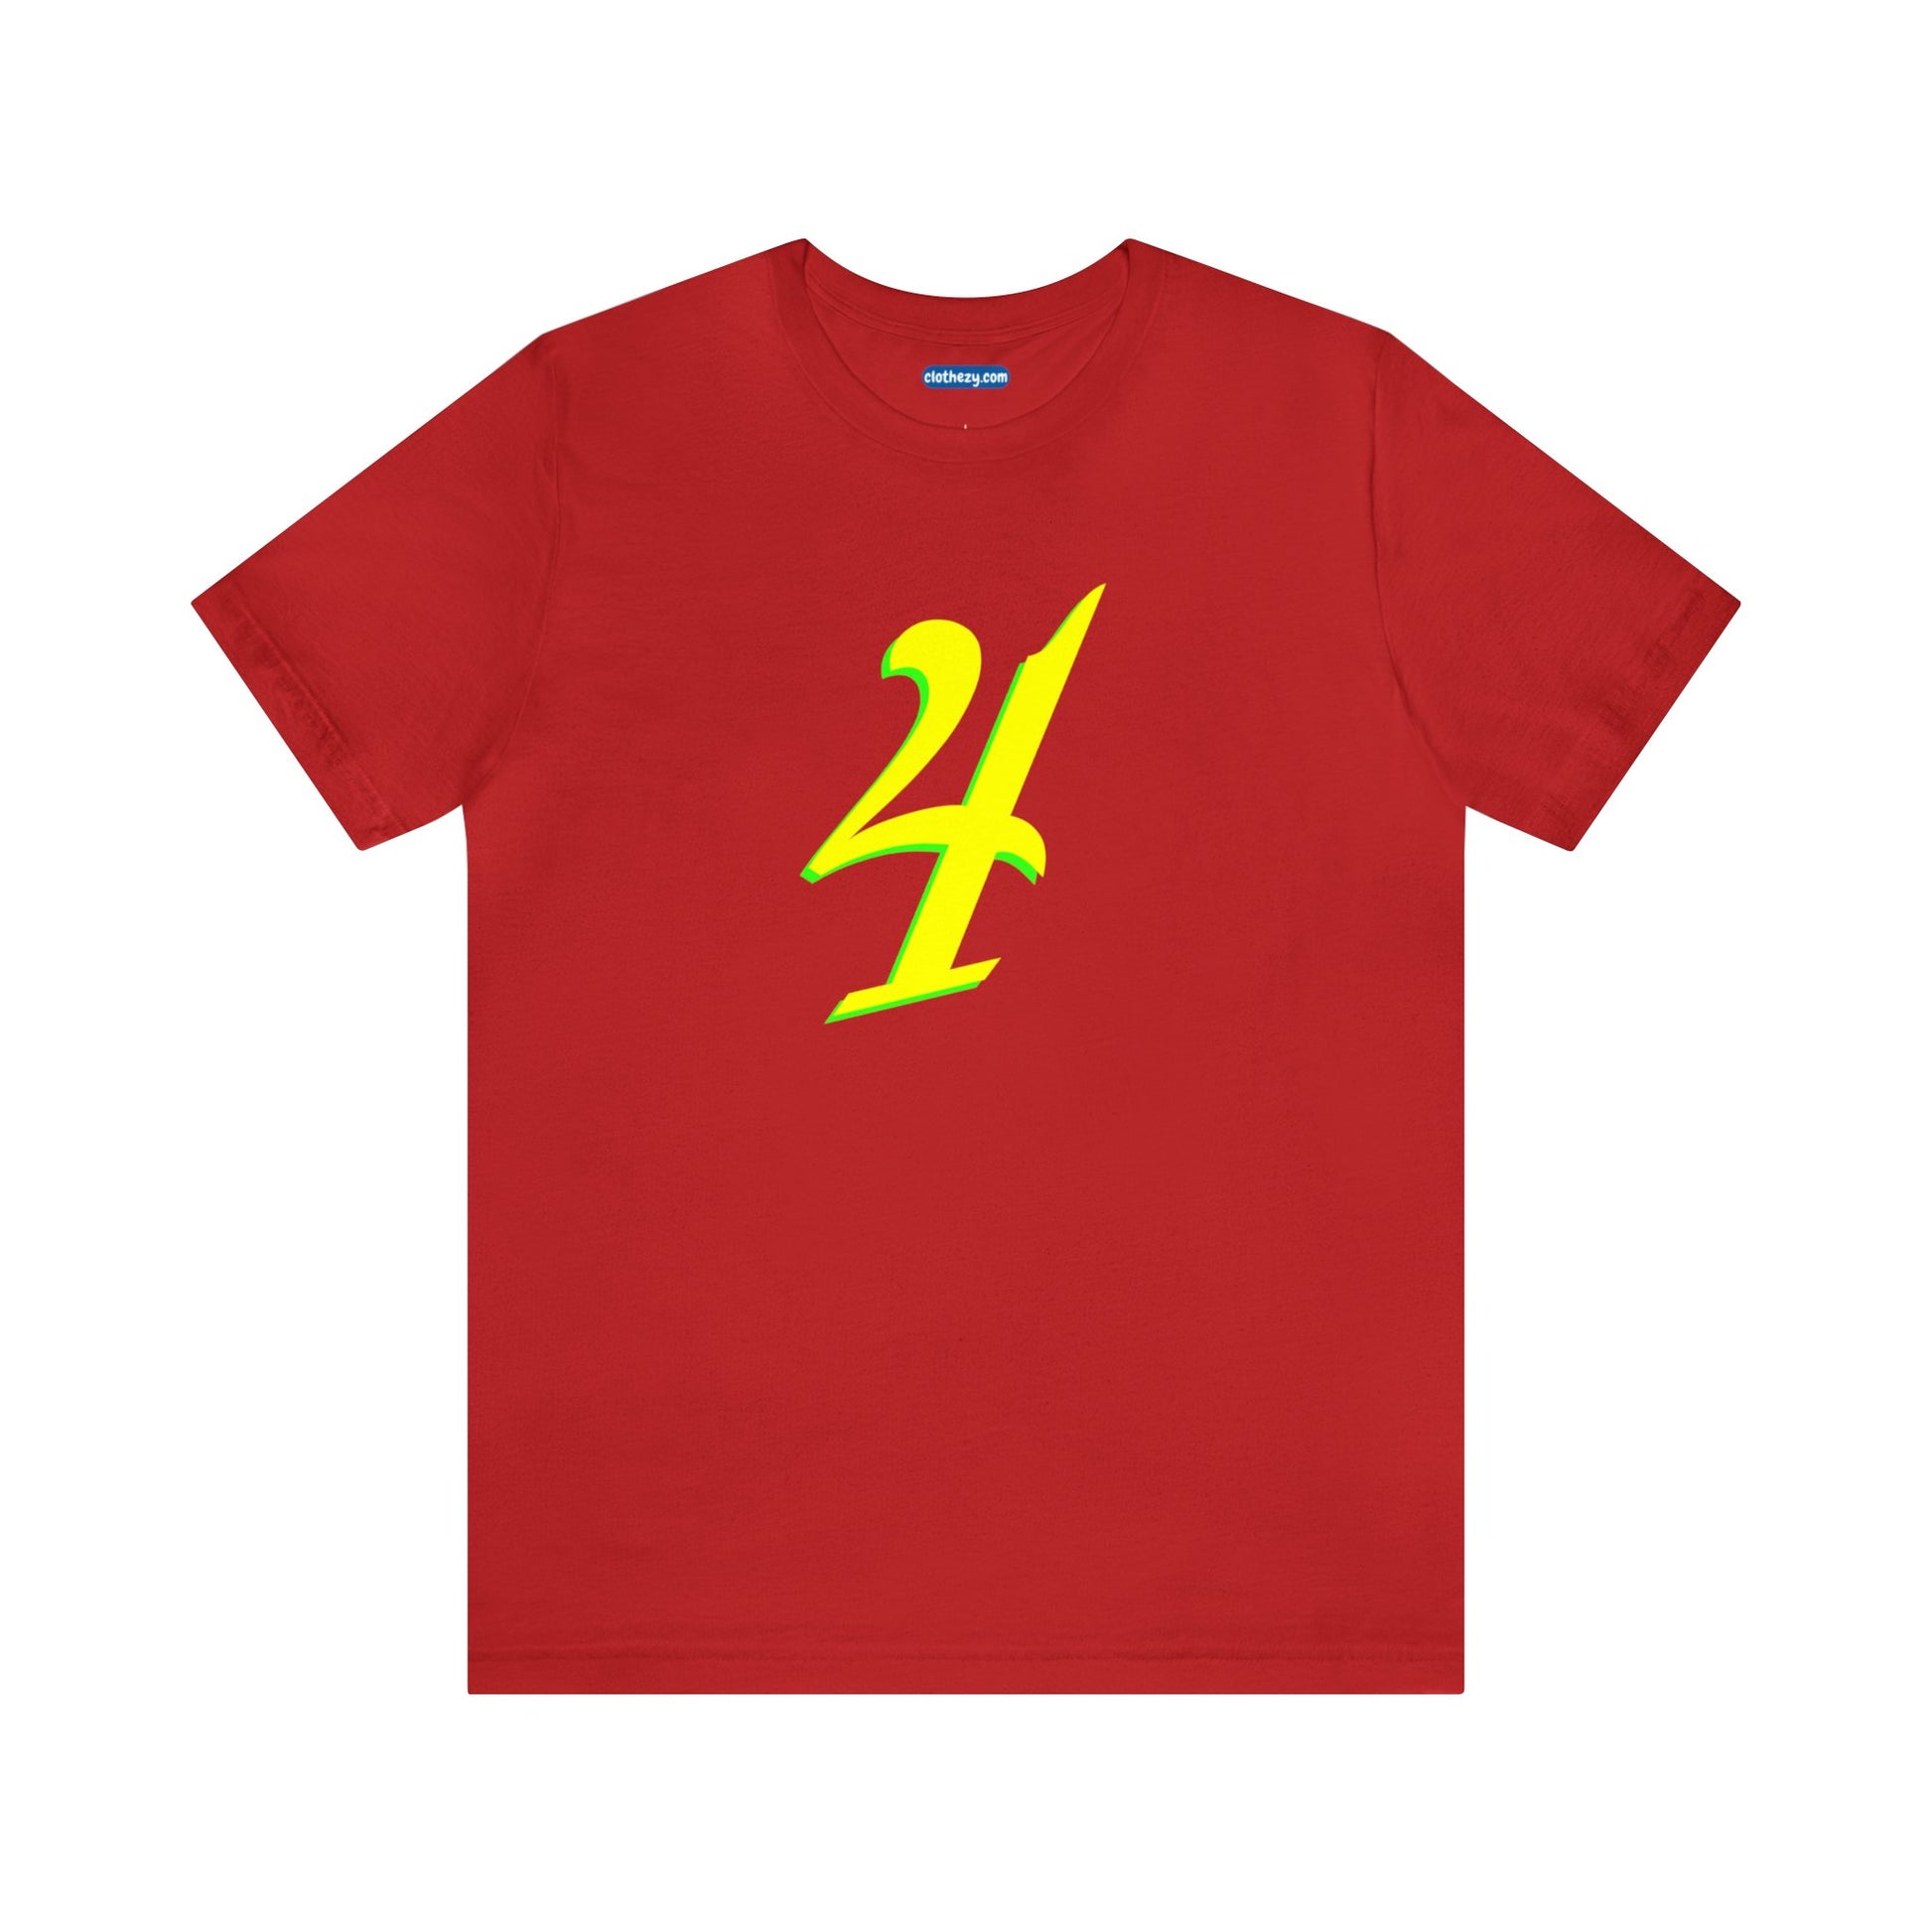 Number 4 Design - Soft Cotton Tee for birthdays and celebrations, Gift for friends and family, Multiple Options by clothezy.com in Red Size Small - Buy Now